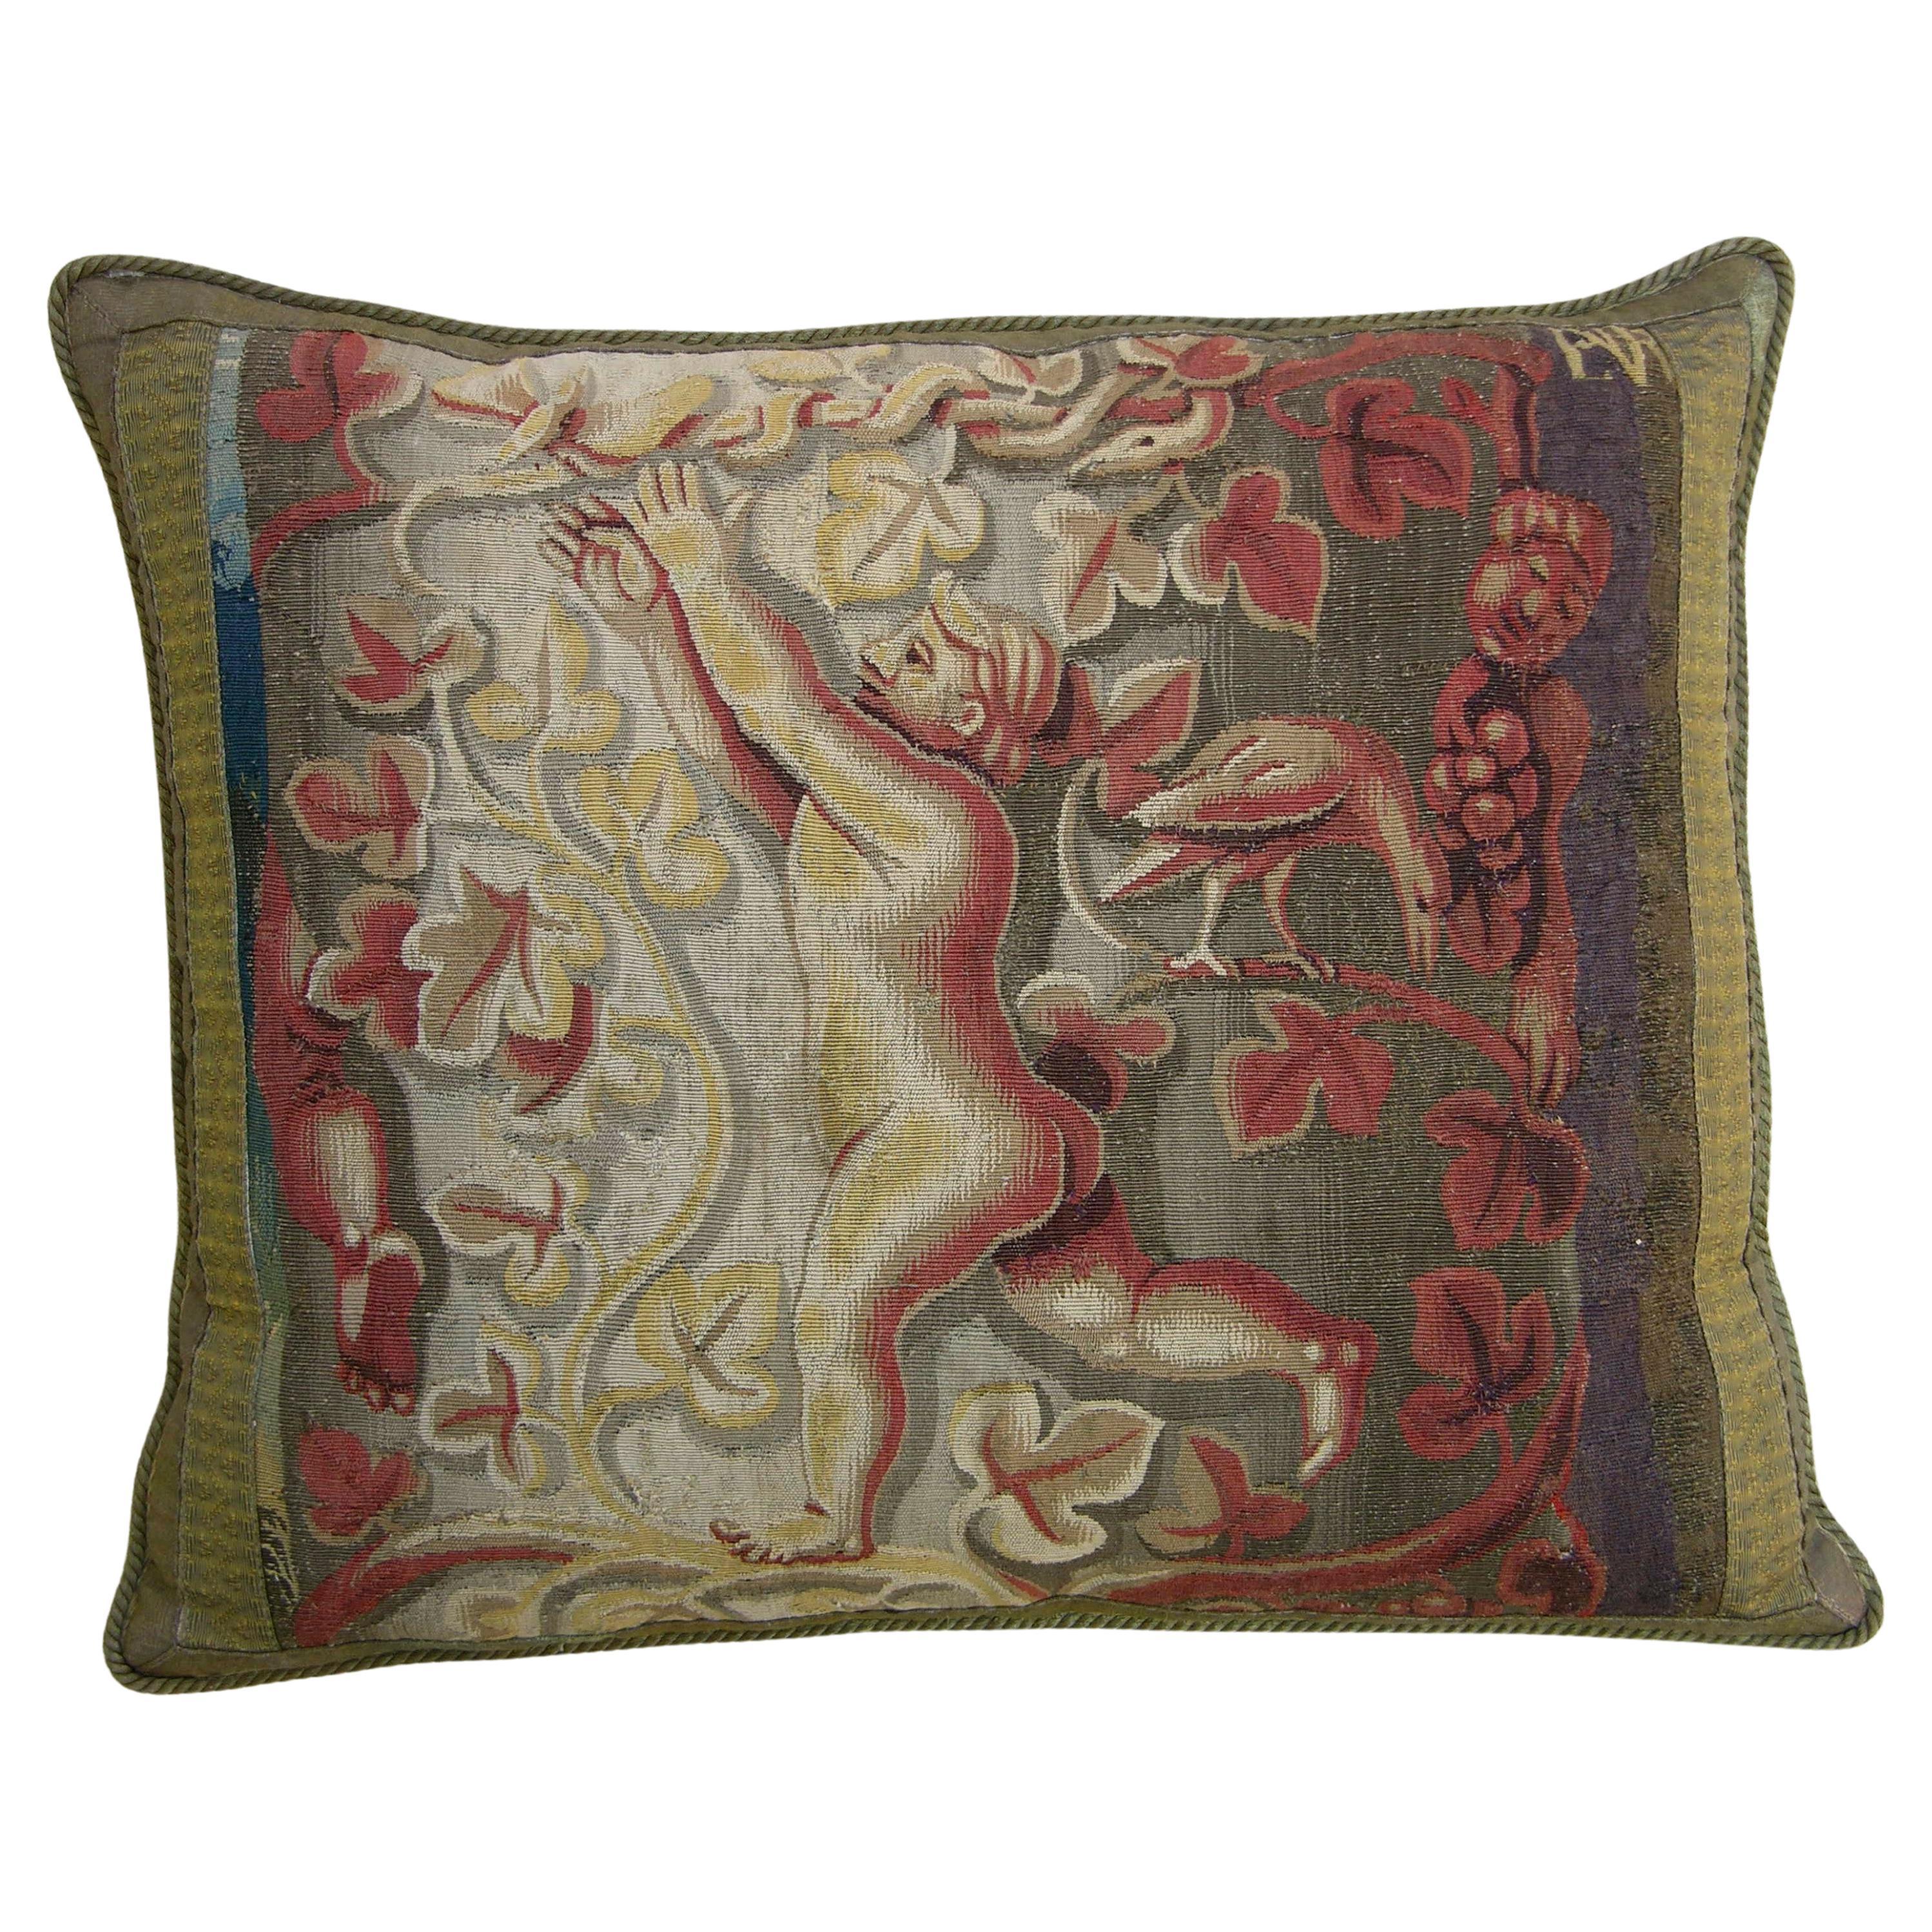 16th Century Antique Flemish Tapestry Pillow - 25'' X 21'' For Sale